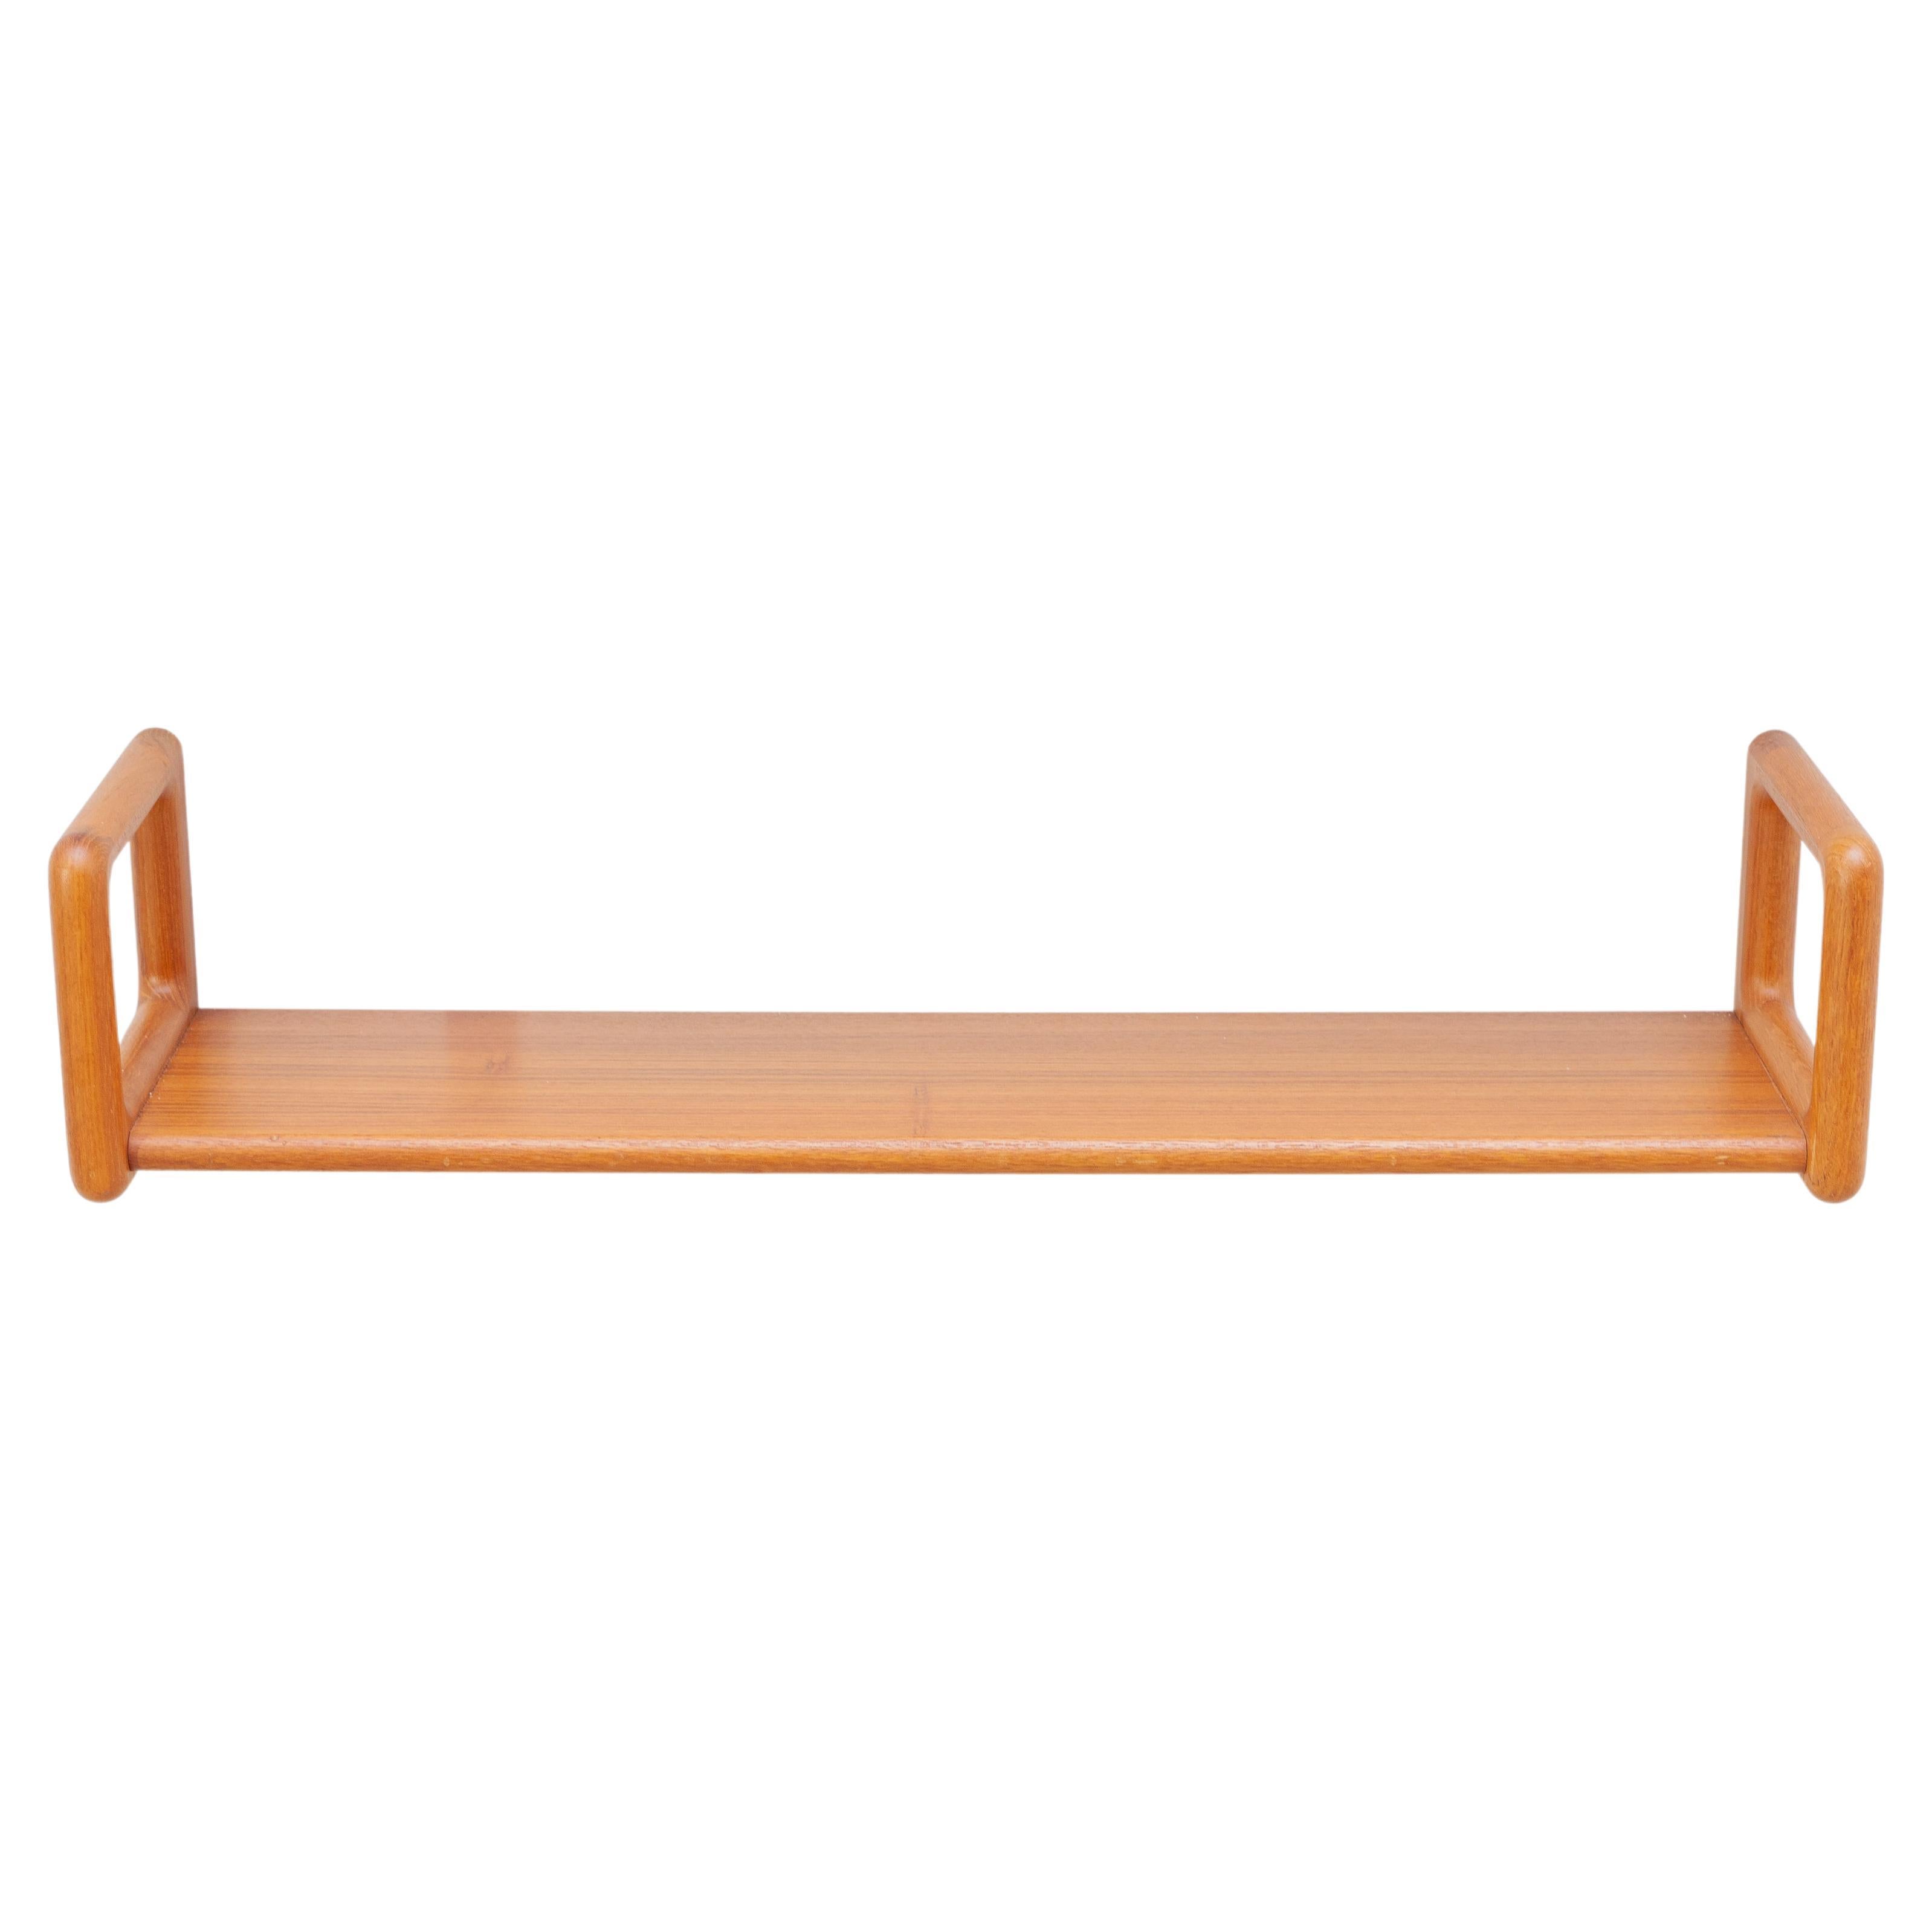 Danish teak wall shelves in classic midcentury design by Kai Kristiansen. Hanging style with soft rounded edges.These teak shelves are a perfect example of a simple Danish design. Invisible hardware on the back creates a floating-on-the-wall